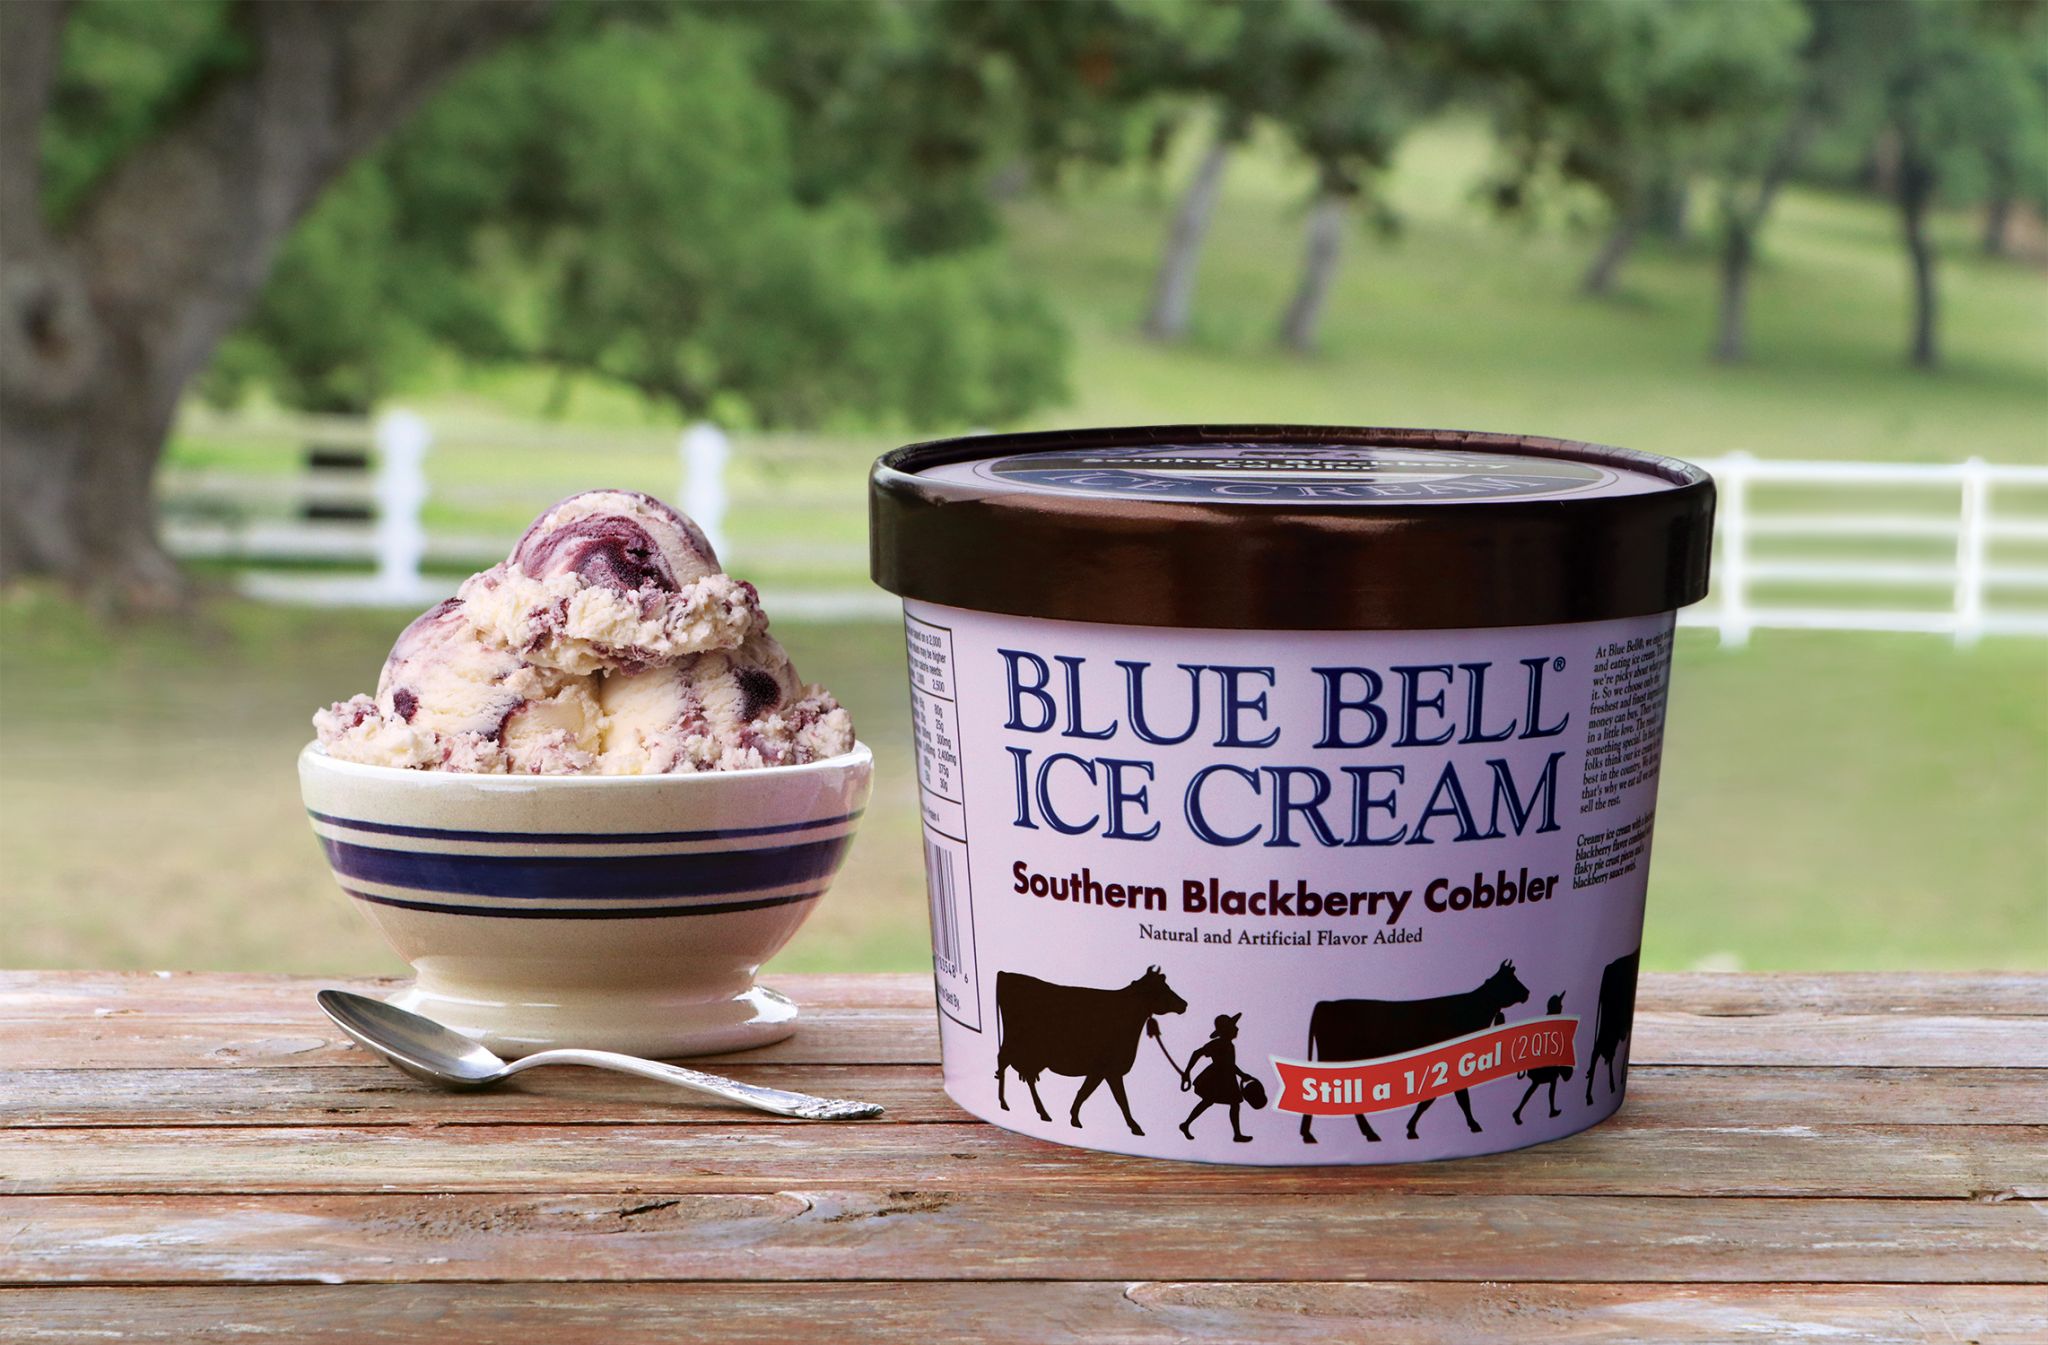 New Blue Bell flavor in stores starting Monday